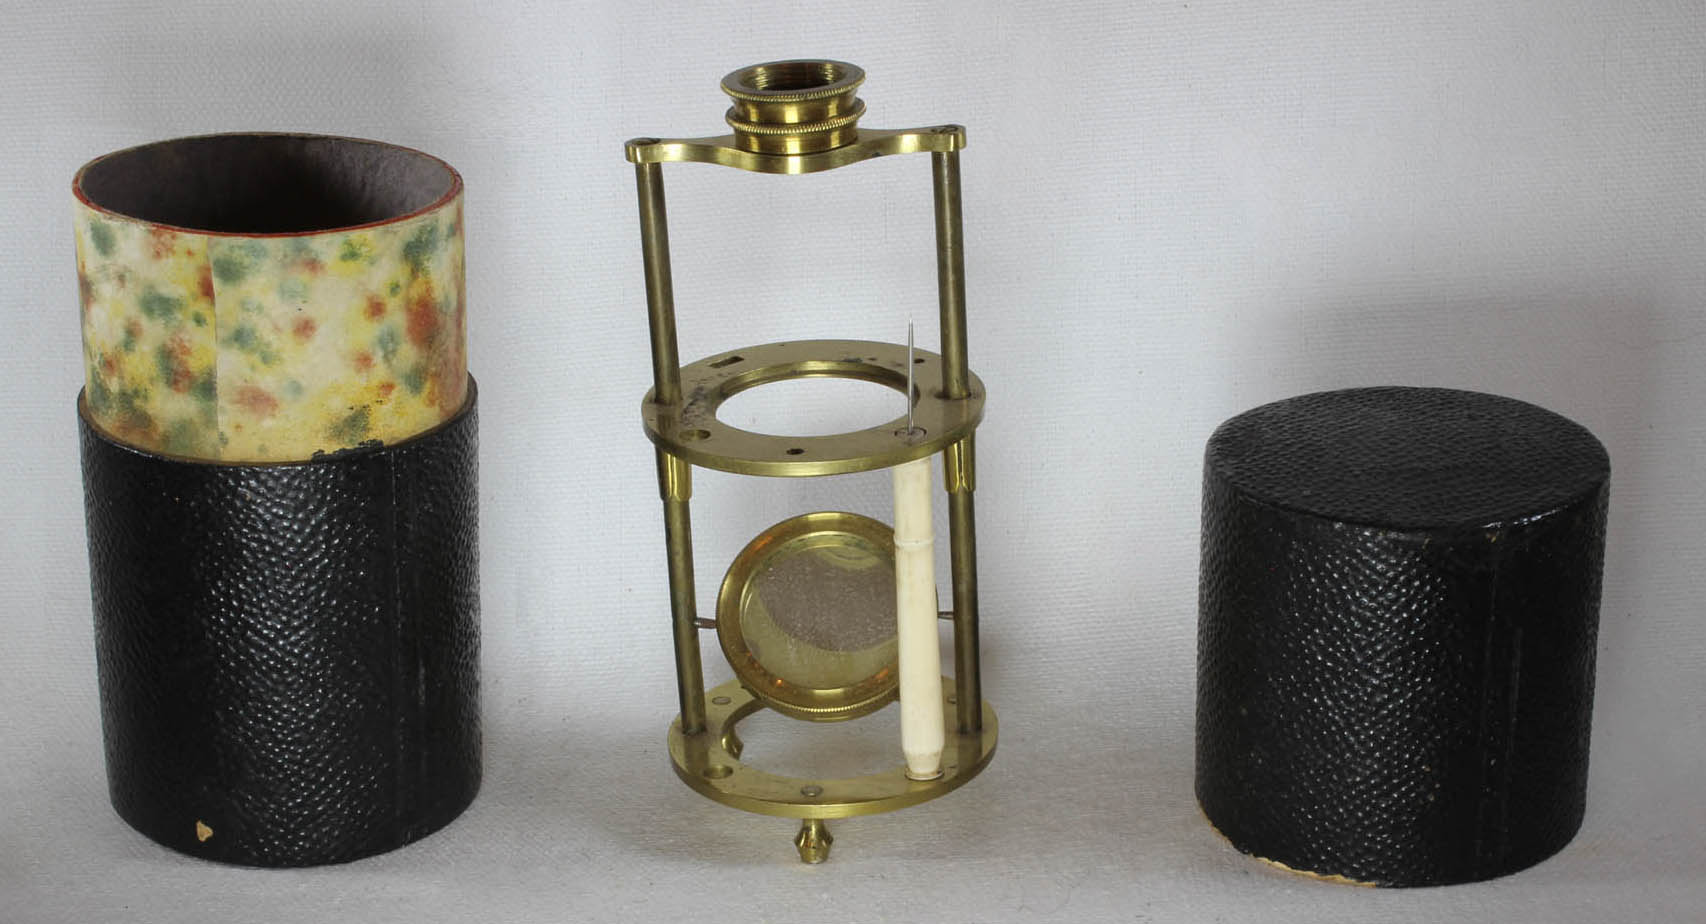 Brass Withering Microscope from 1815